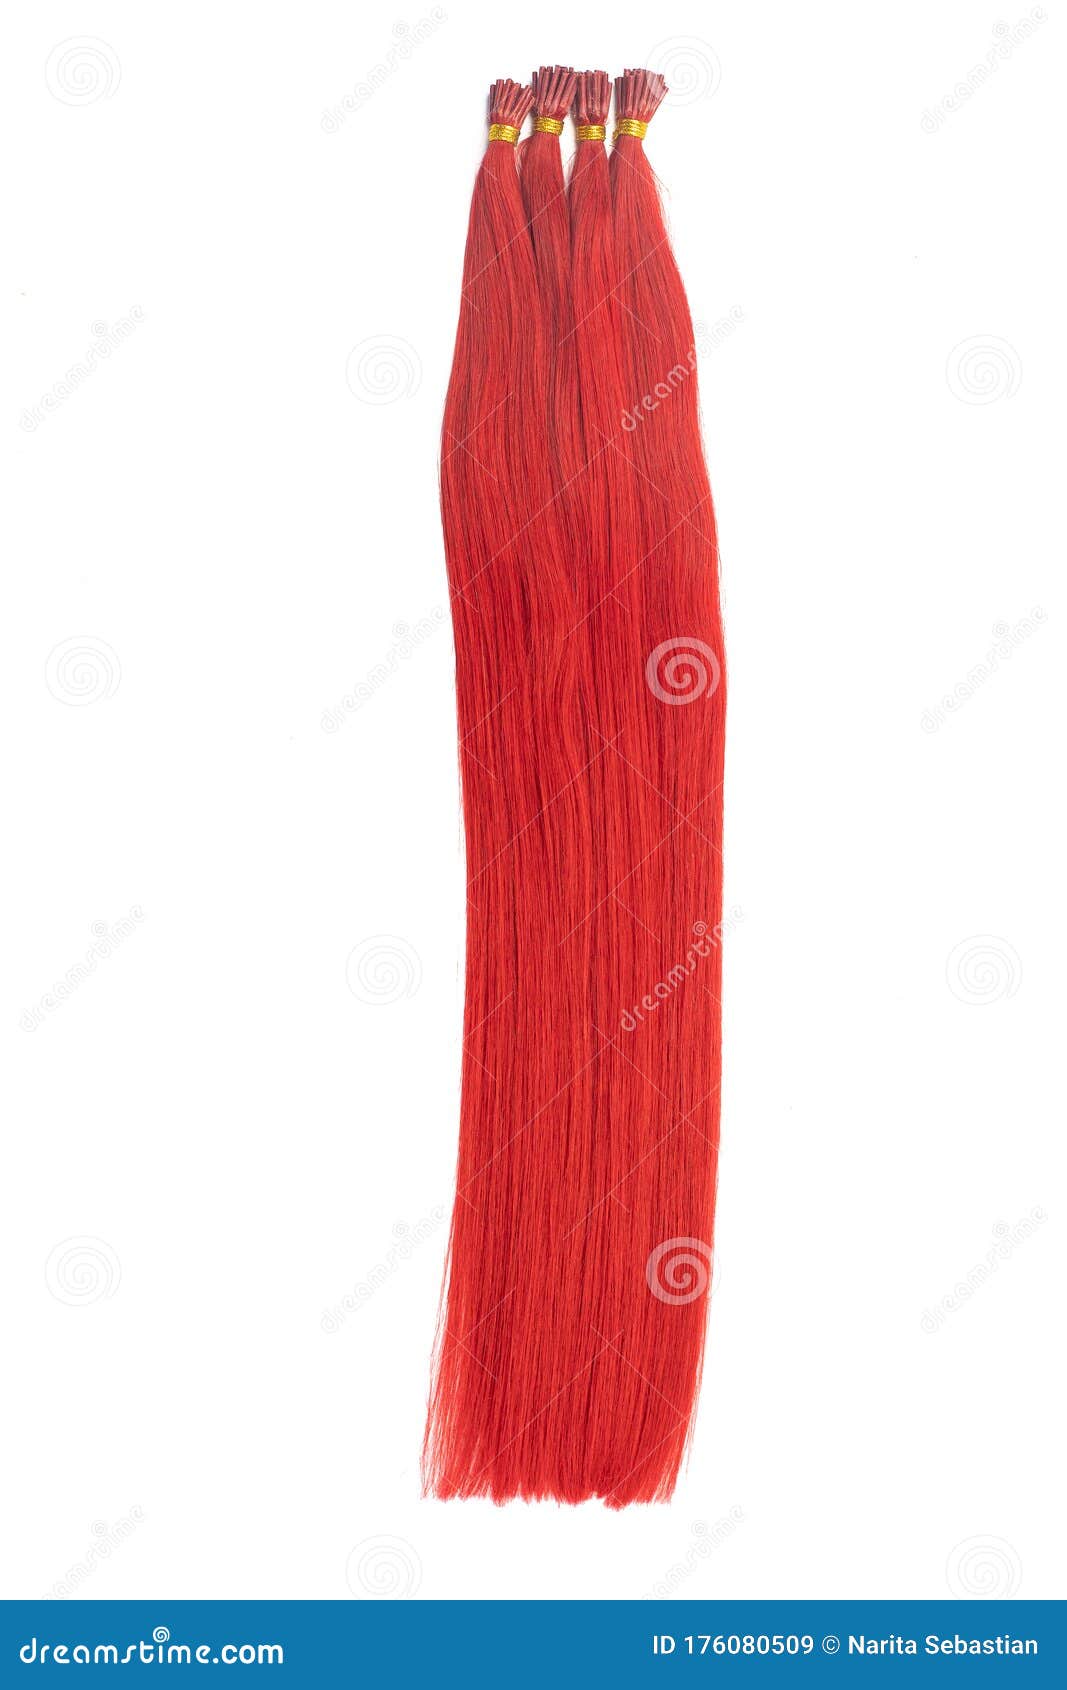 Hair Extensions Fake Human Hair for Women - Red Hair Stock Image - Image of  brown, blond: 176080509